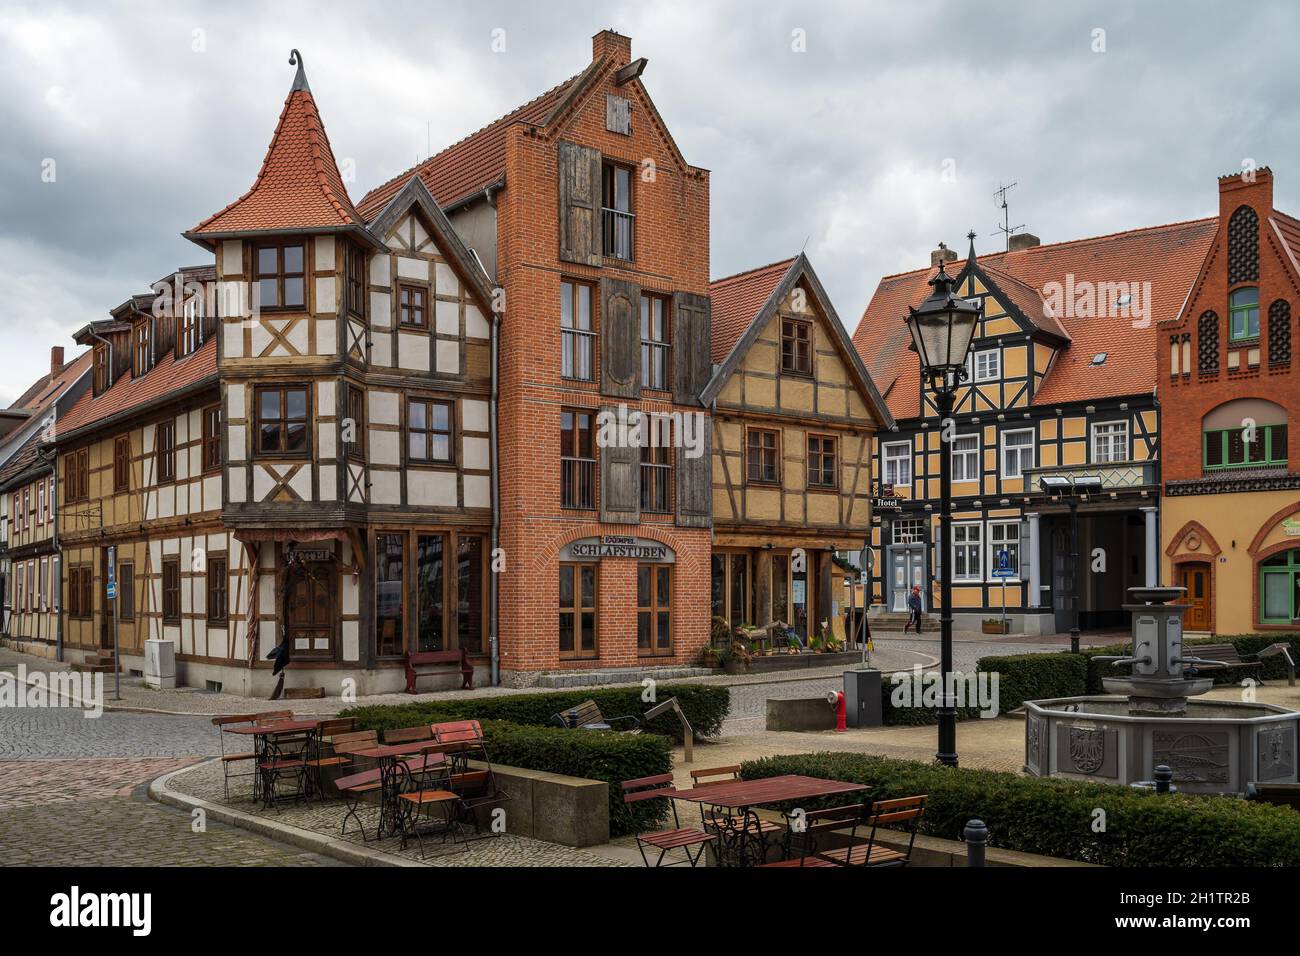 TANGERMUENDE, GERMANY - APRIL 24, 2021: Closed restaurant. Old street of a historic town of Tangermuende. Saxony-Anhalt state. Stock Photo